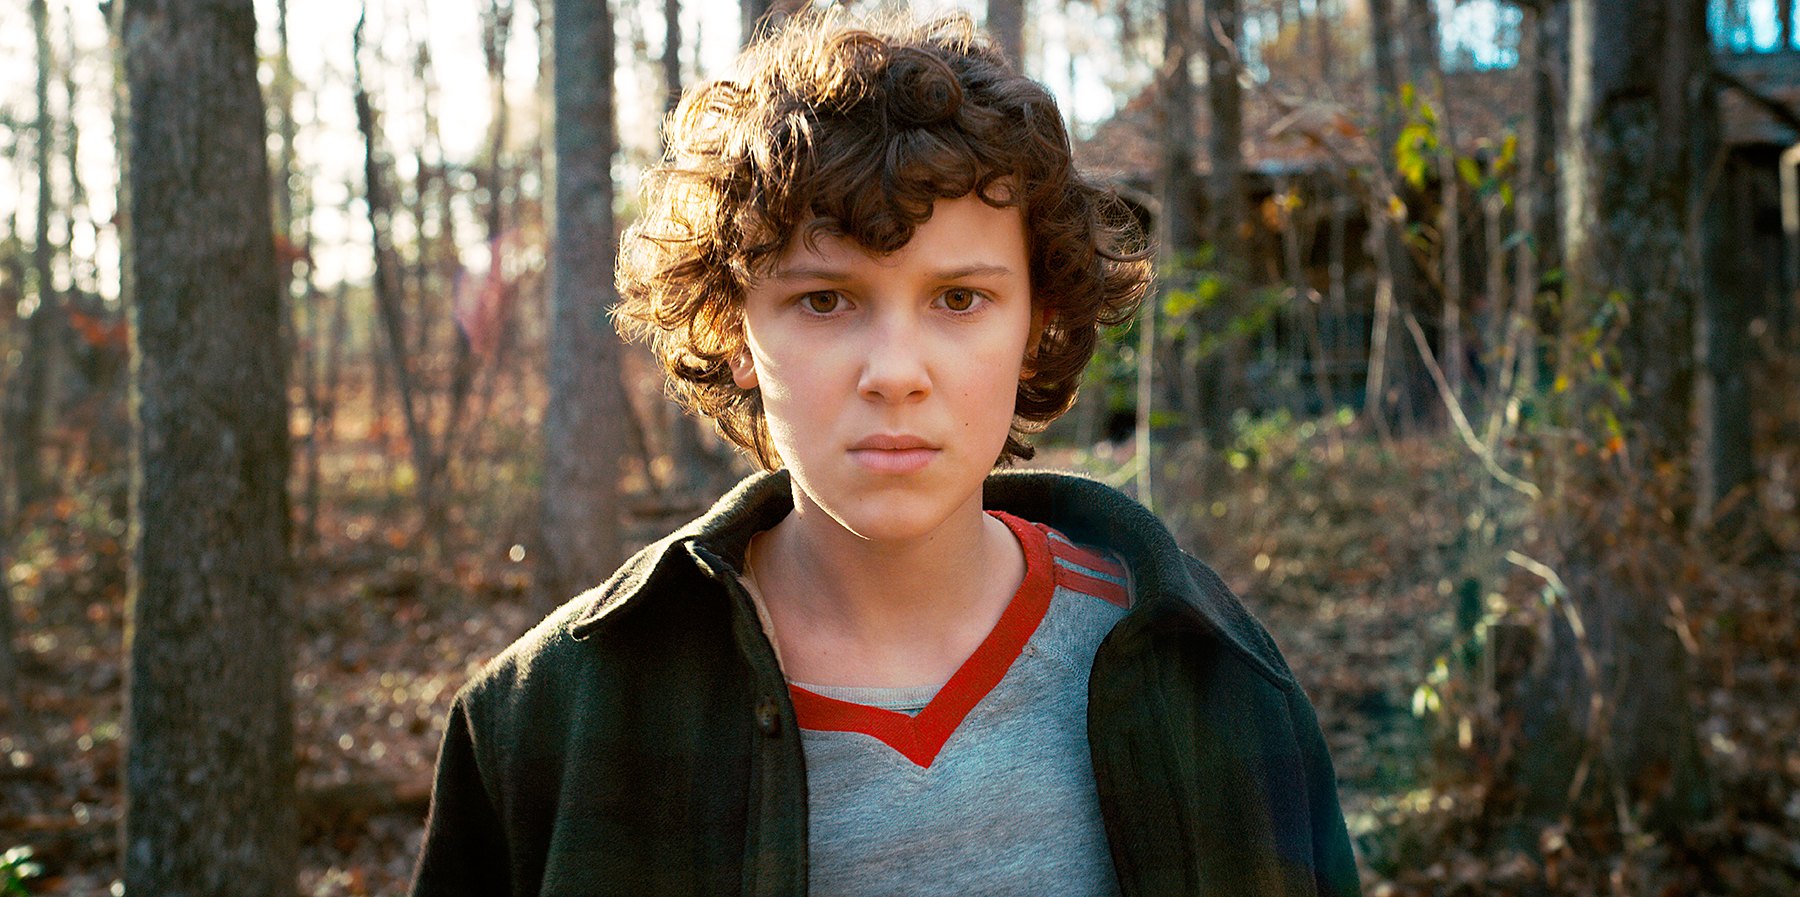 Millie Bobby Brown Says She Is “Ready to Wrap Up” Stranger Things